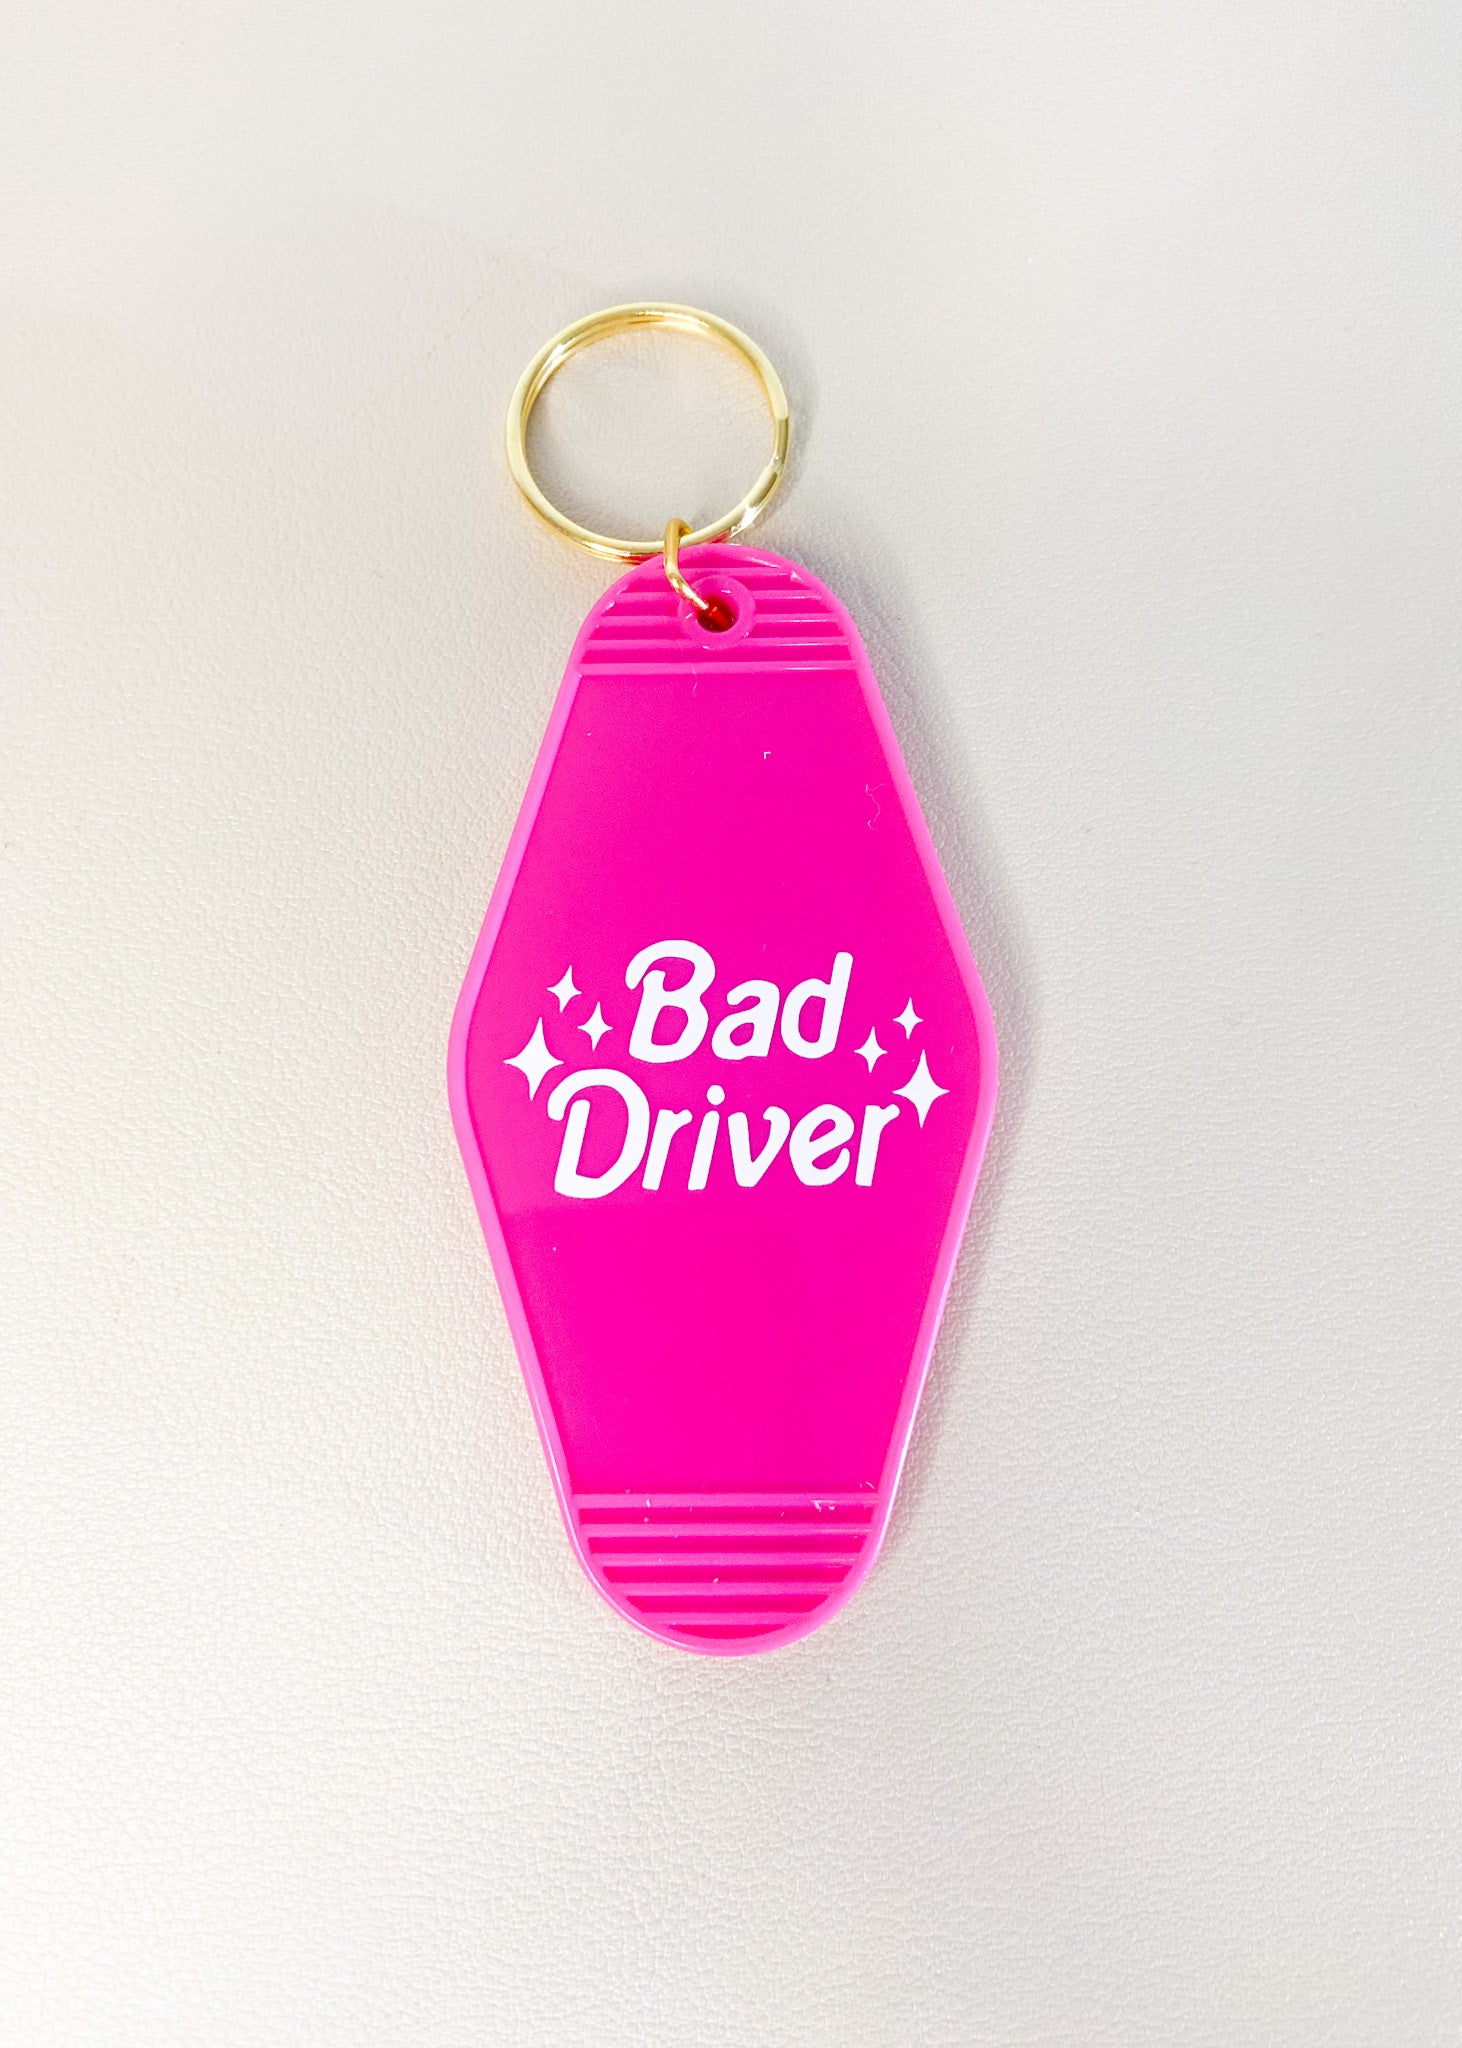 Porte-Clés Bad Driver Rose Girly – Backat & Co